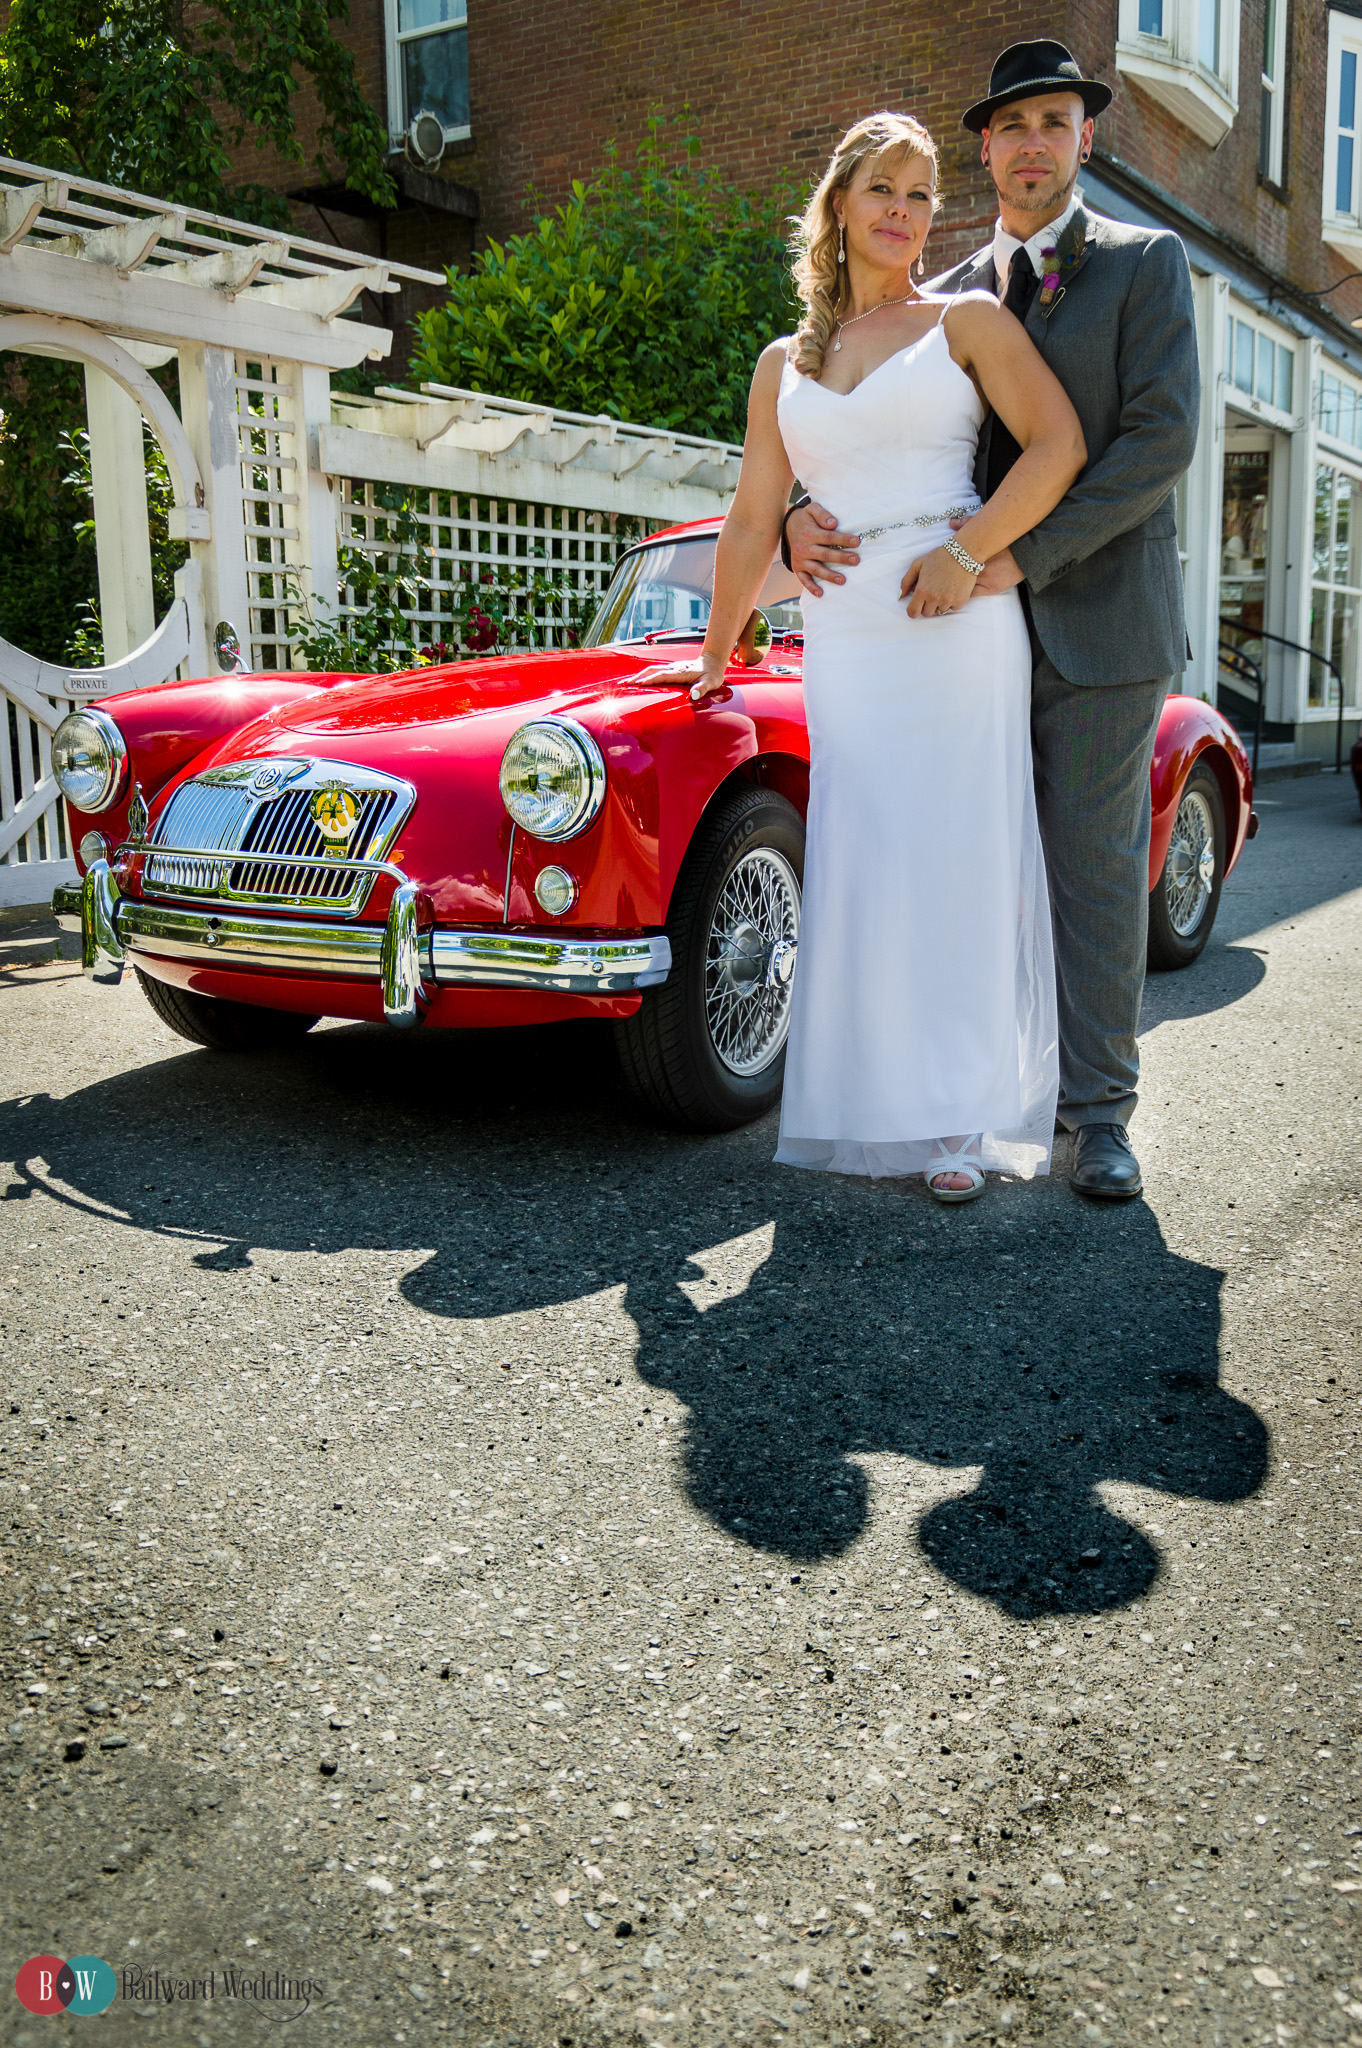 Bride and groom posing in front of classic car